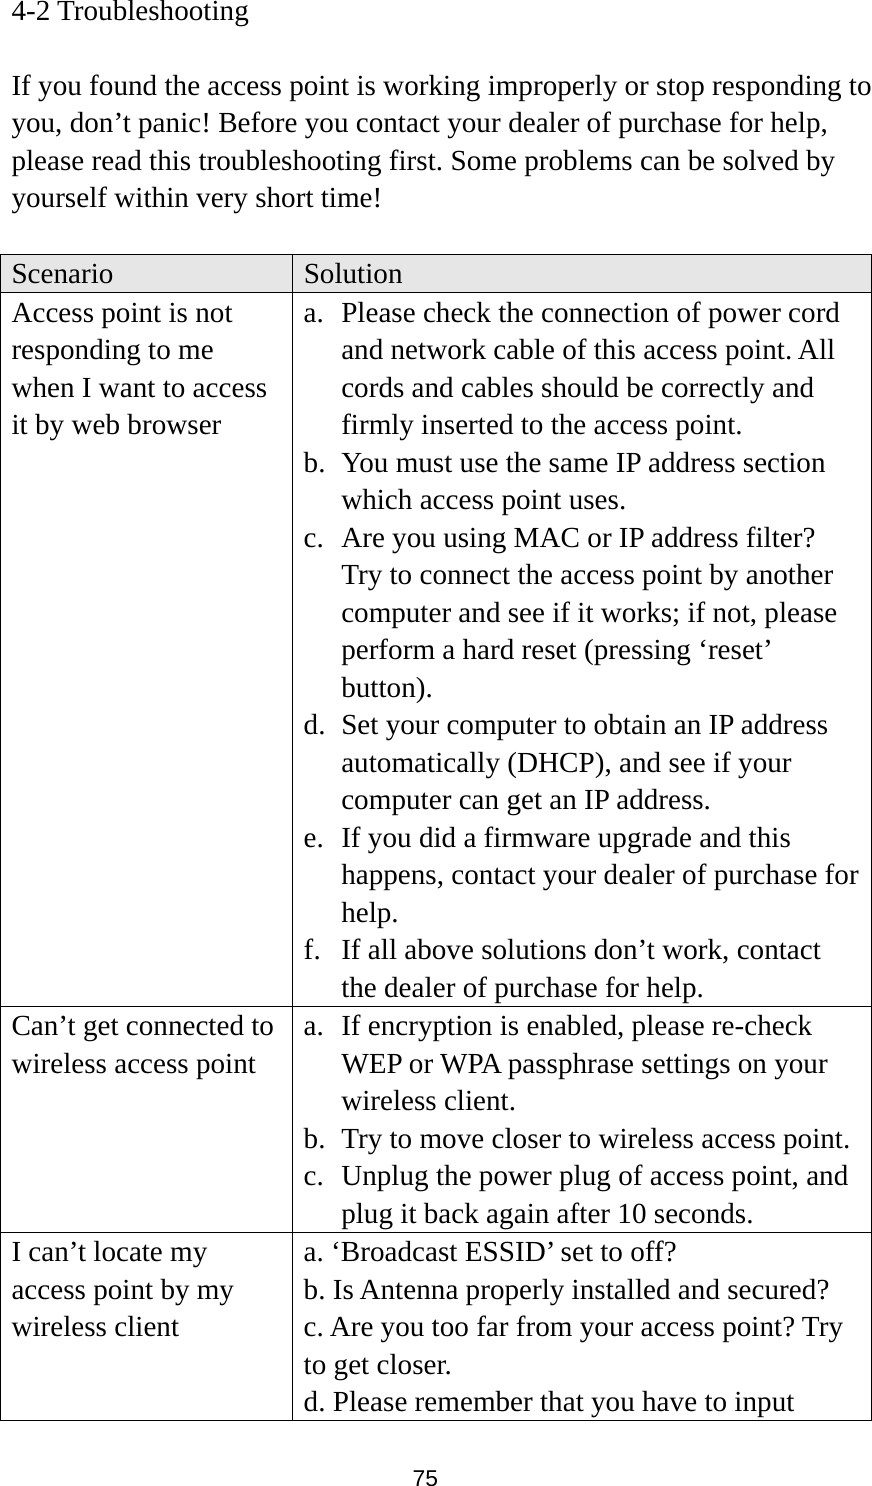 75 4-2 Troubleshooting  If you found the access point is working improperly or stop responding to you, don’t panic! Before you contact your dealer of purchase for help, please read this troubleshooting first. Some problems can be solved by yourself within very short time!  Scenario  Solution Access point is not responding to me when I want to access it by web browser a. Please check the connection of power cord and network cable of this access point. All cords and cables should be correctly and firmly inserted to the access point. b. You must use the same IP address section which access point uses. c. Are you using MAC or IP address filter? Try to connect the access point by another computer and see if it works; if not, please perform a hard reset (pressing ‘reset’ button). d. Set your computer to obtain an IP address automatically (DHCP), and see if your computer can get an IP address. e. If you did a firmware upgrade and this happens, contact your dealer of purchase for help. f. If all above solutions don’t work, contact the dealer of purchase for help. Can’t get connected to wireless access point a. If encryption is enabled, please re-check WEP or WPA passphrase settings on your wireless client. b. Try to move closer to wireless access point. c. Unplug the power plug of access point, and plug it back again after 10 seconds. I can’t locate my access point by my wireless client a. ‘Broadcast ESSID’ set to off? b. Is Antenna properly installed and secured? c. Are you too far from your access point? Try to get closer. d. Please remember that you have to input 